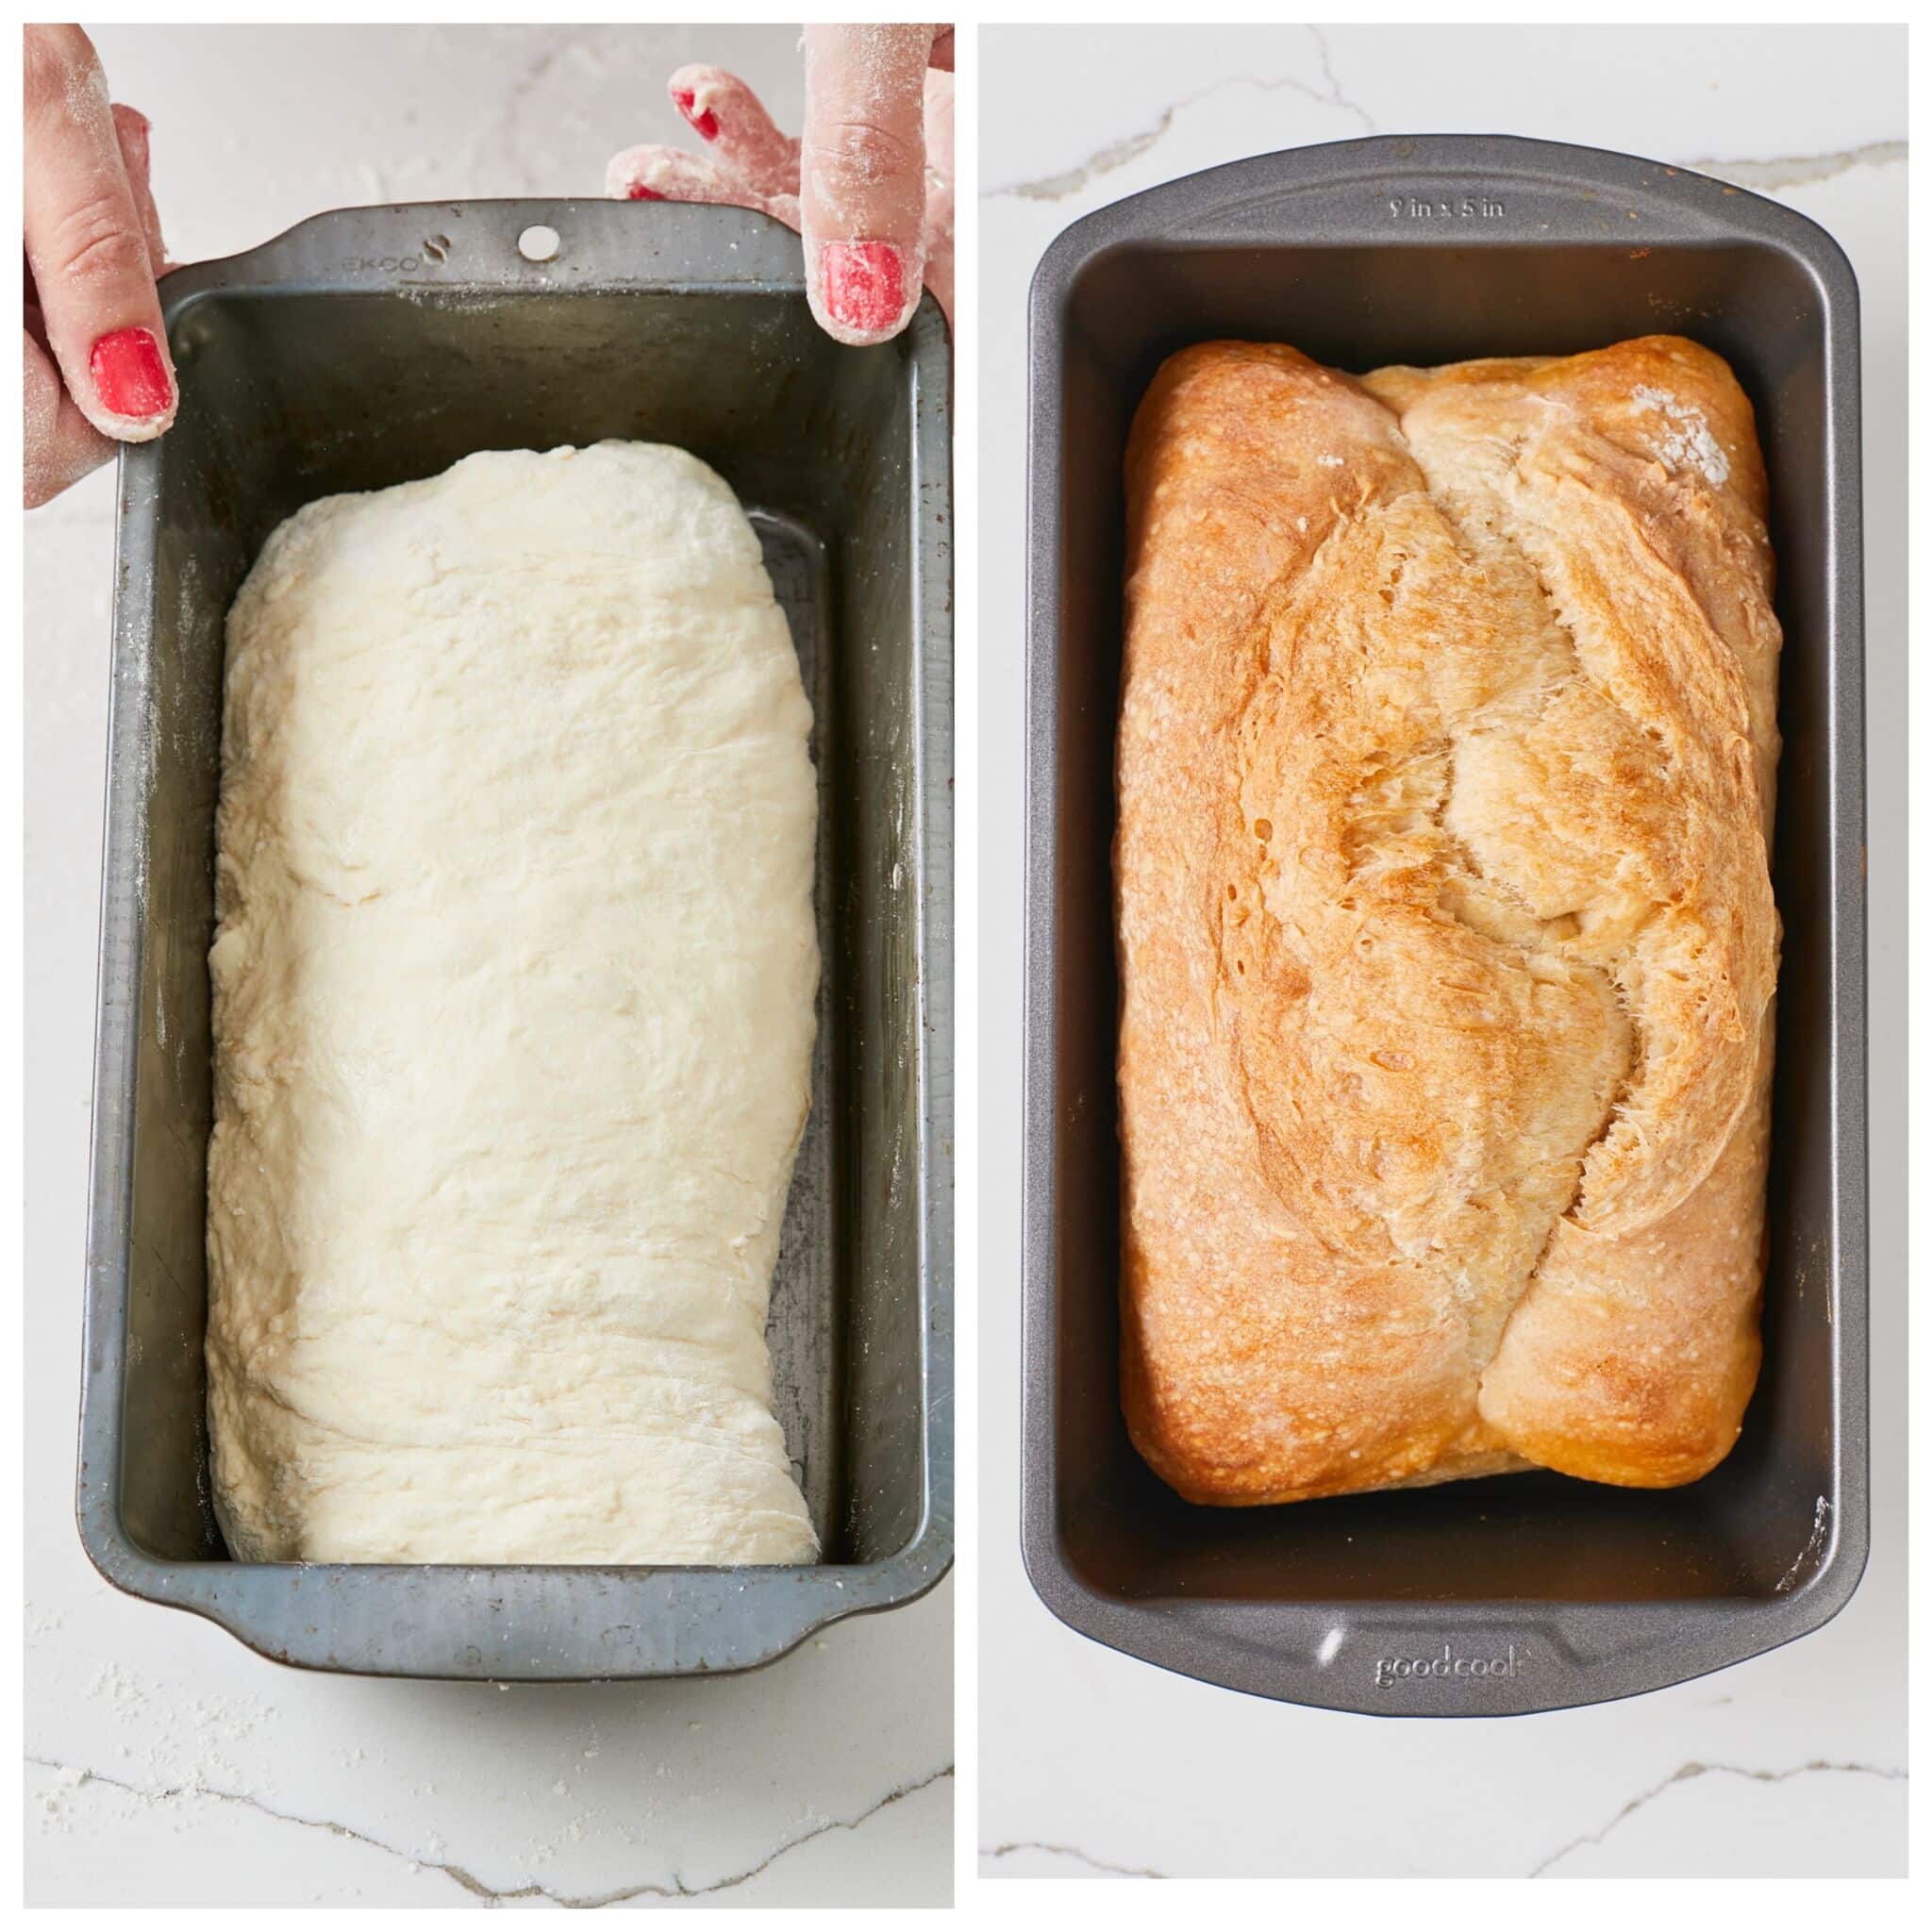 The dough had been shaped and placed in a prepared metal loaf pan. It was baked until deep golden brown. 